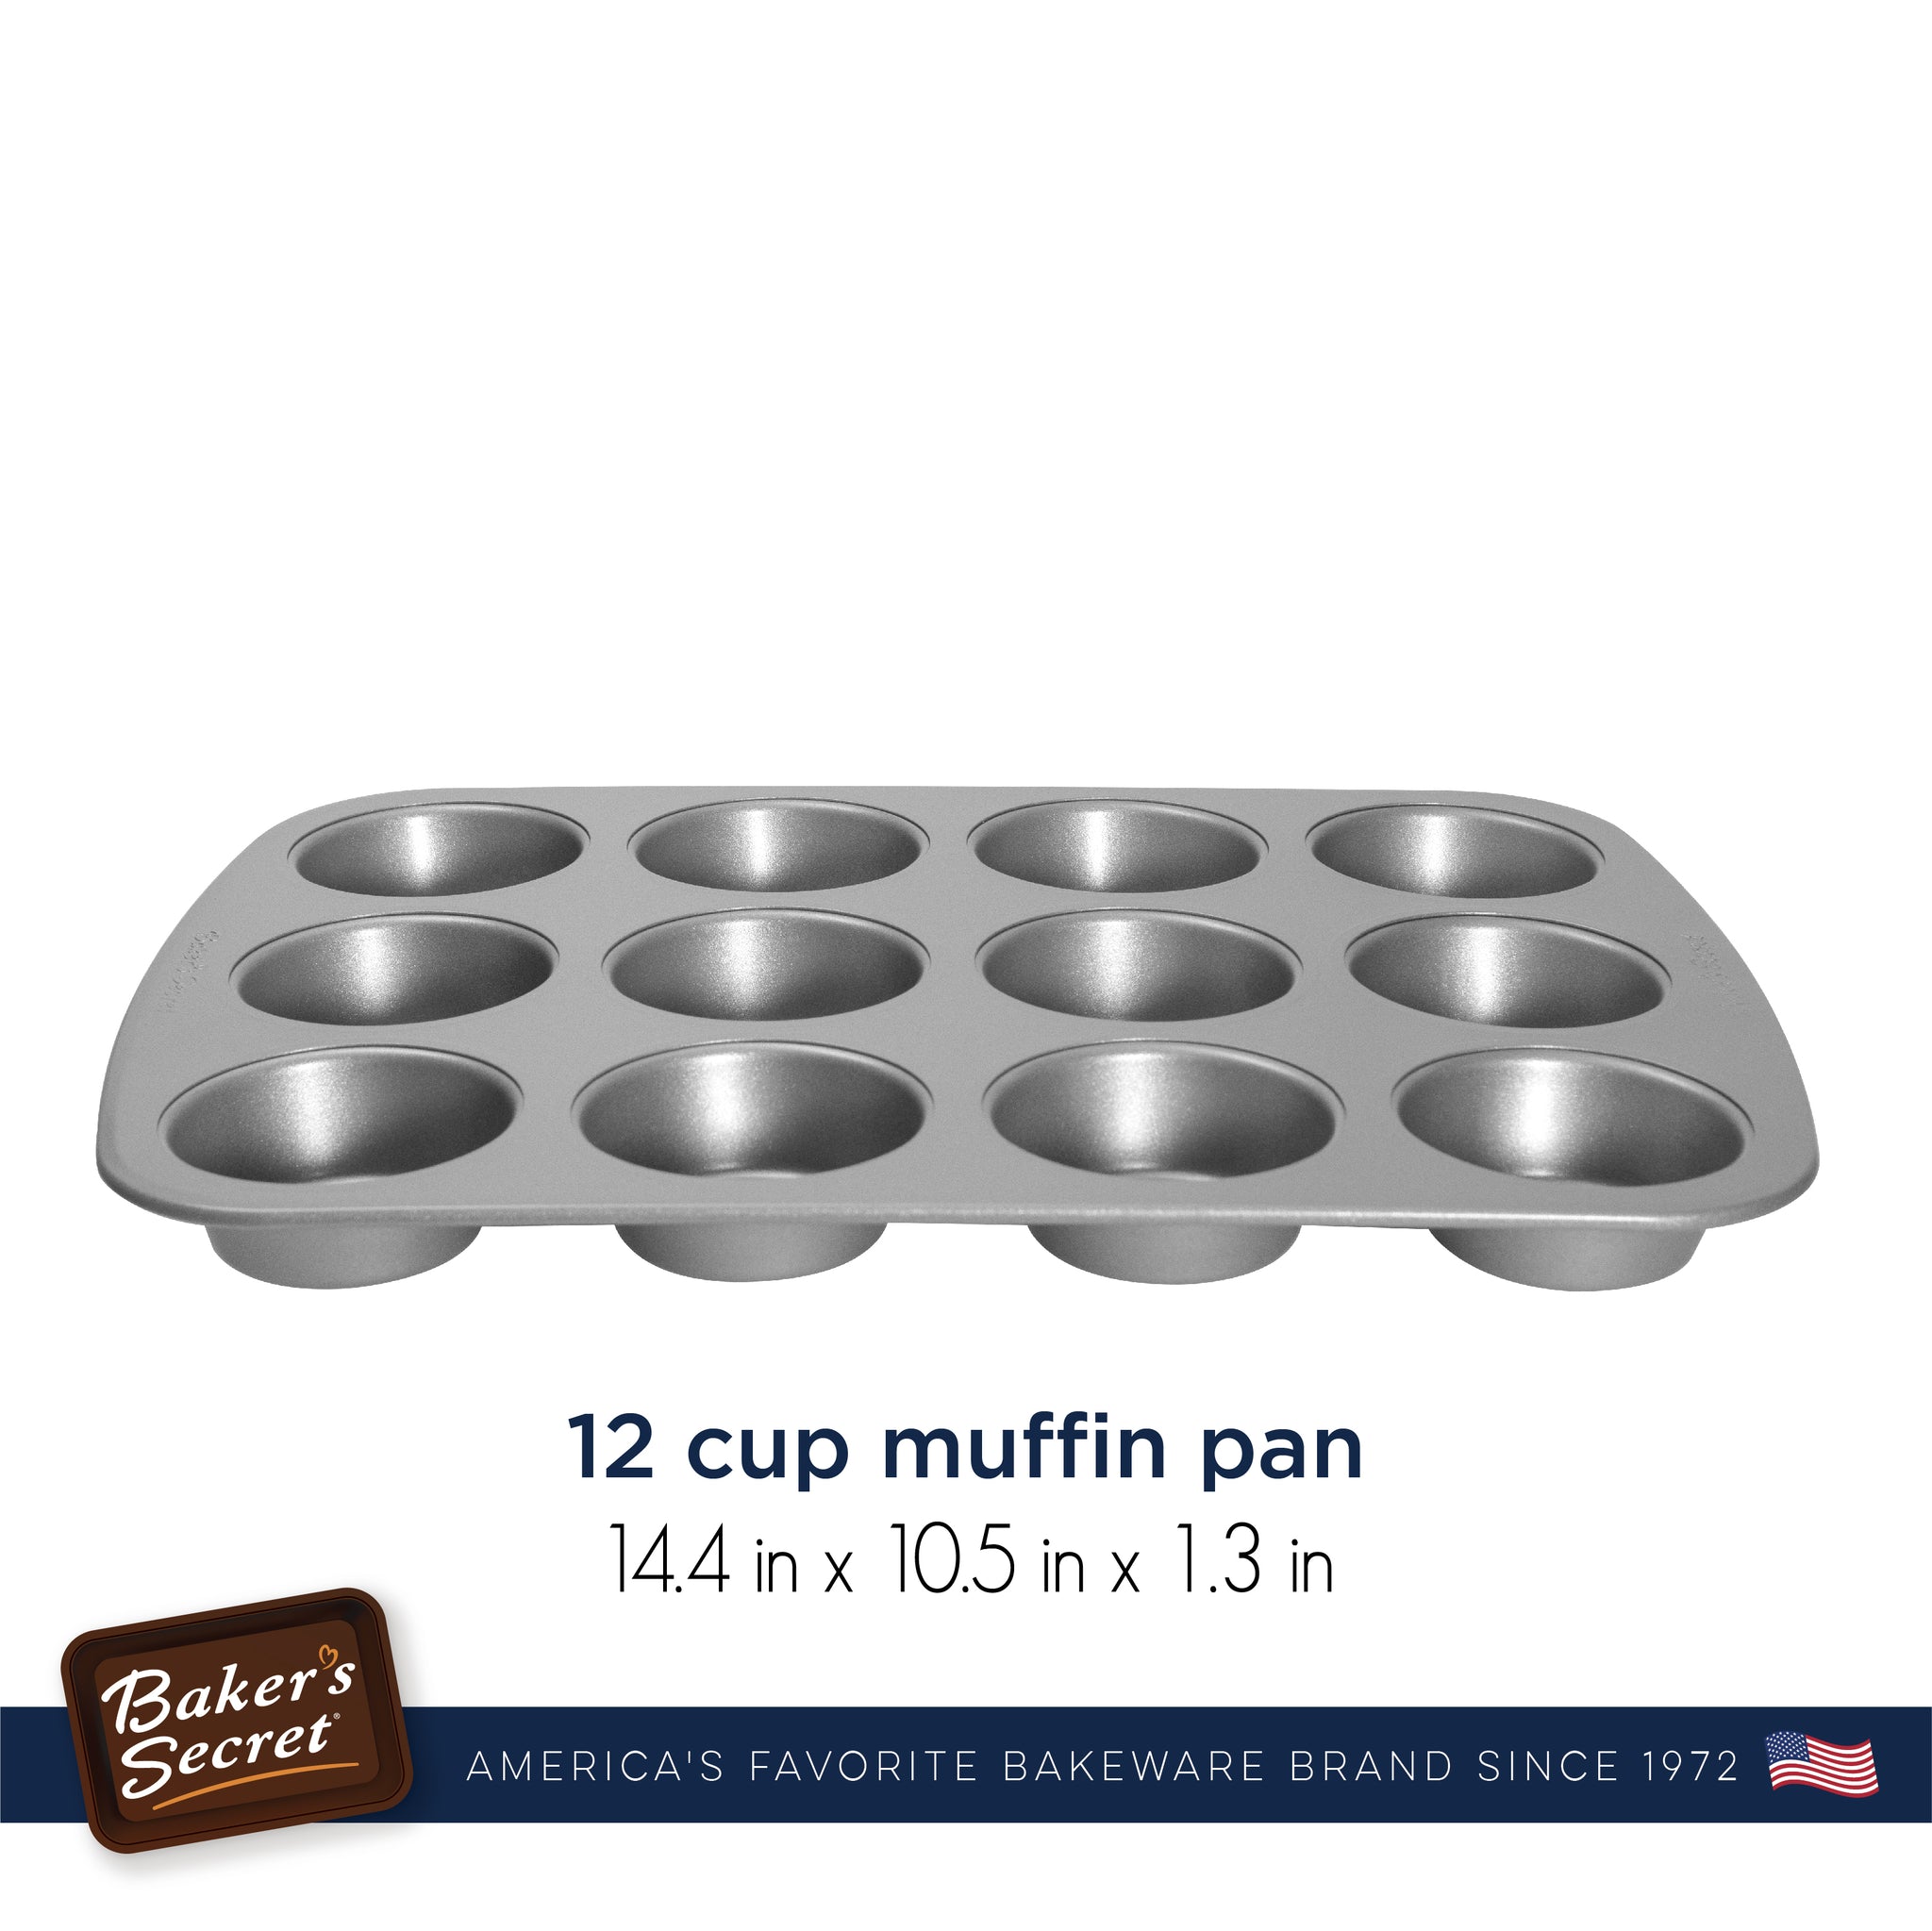 12 Cups Muffin Pan  Muffin & Pastry Pans - Baker's Secret